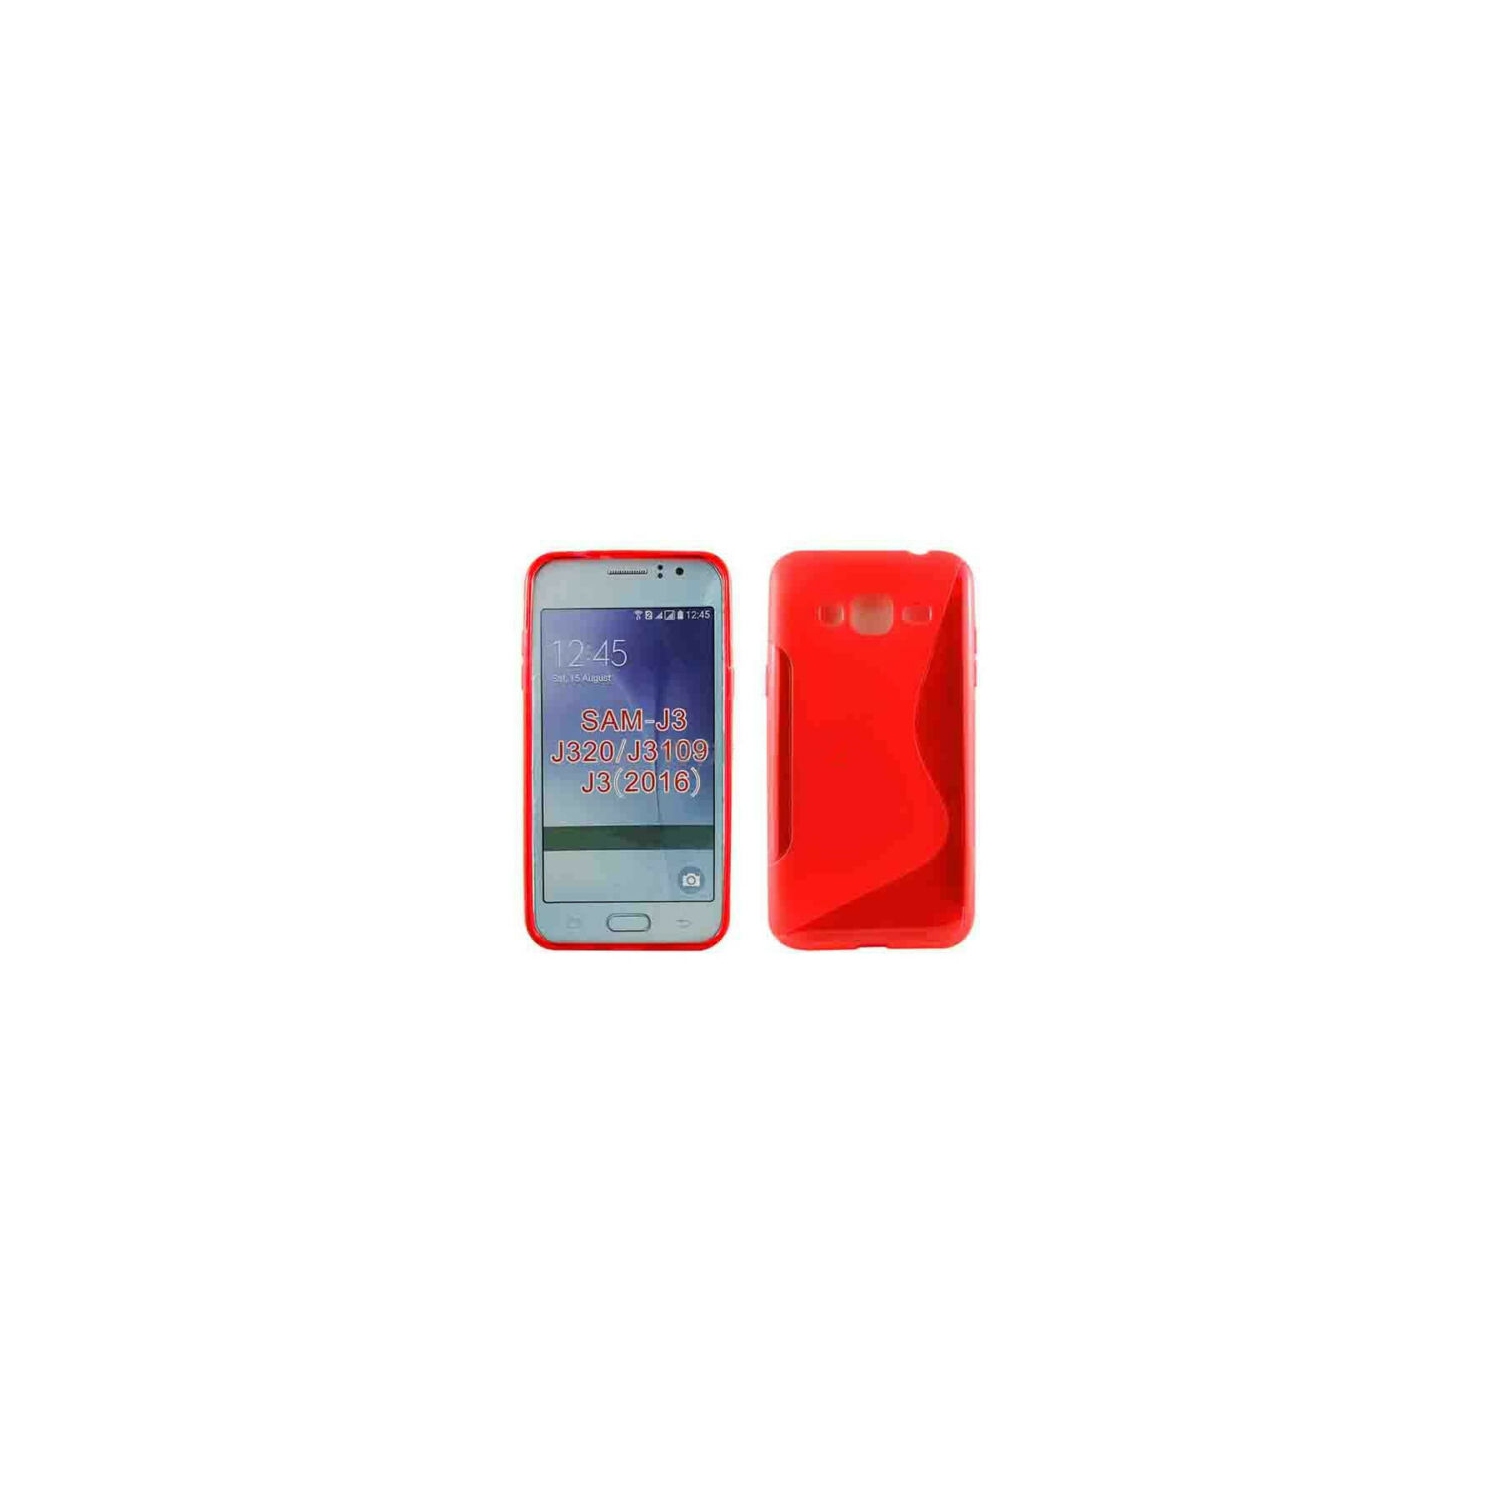 【CSmart】 Ultra Thin Soft TPU Silicone Jelly Bumper Back Cover Case for Samsung Galaxy J3 2016, Red